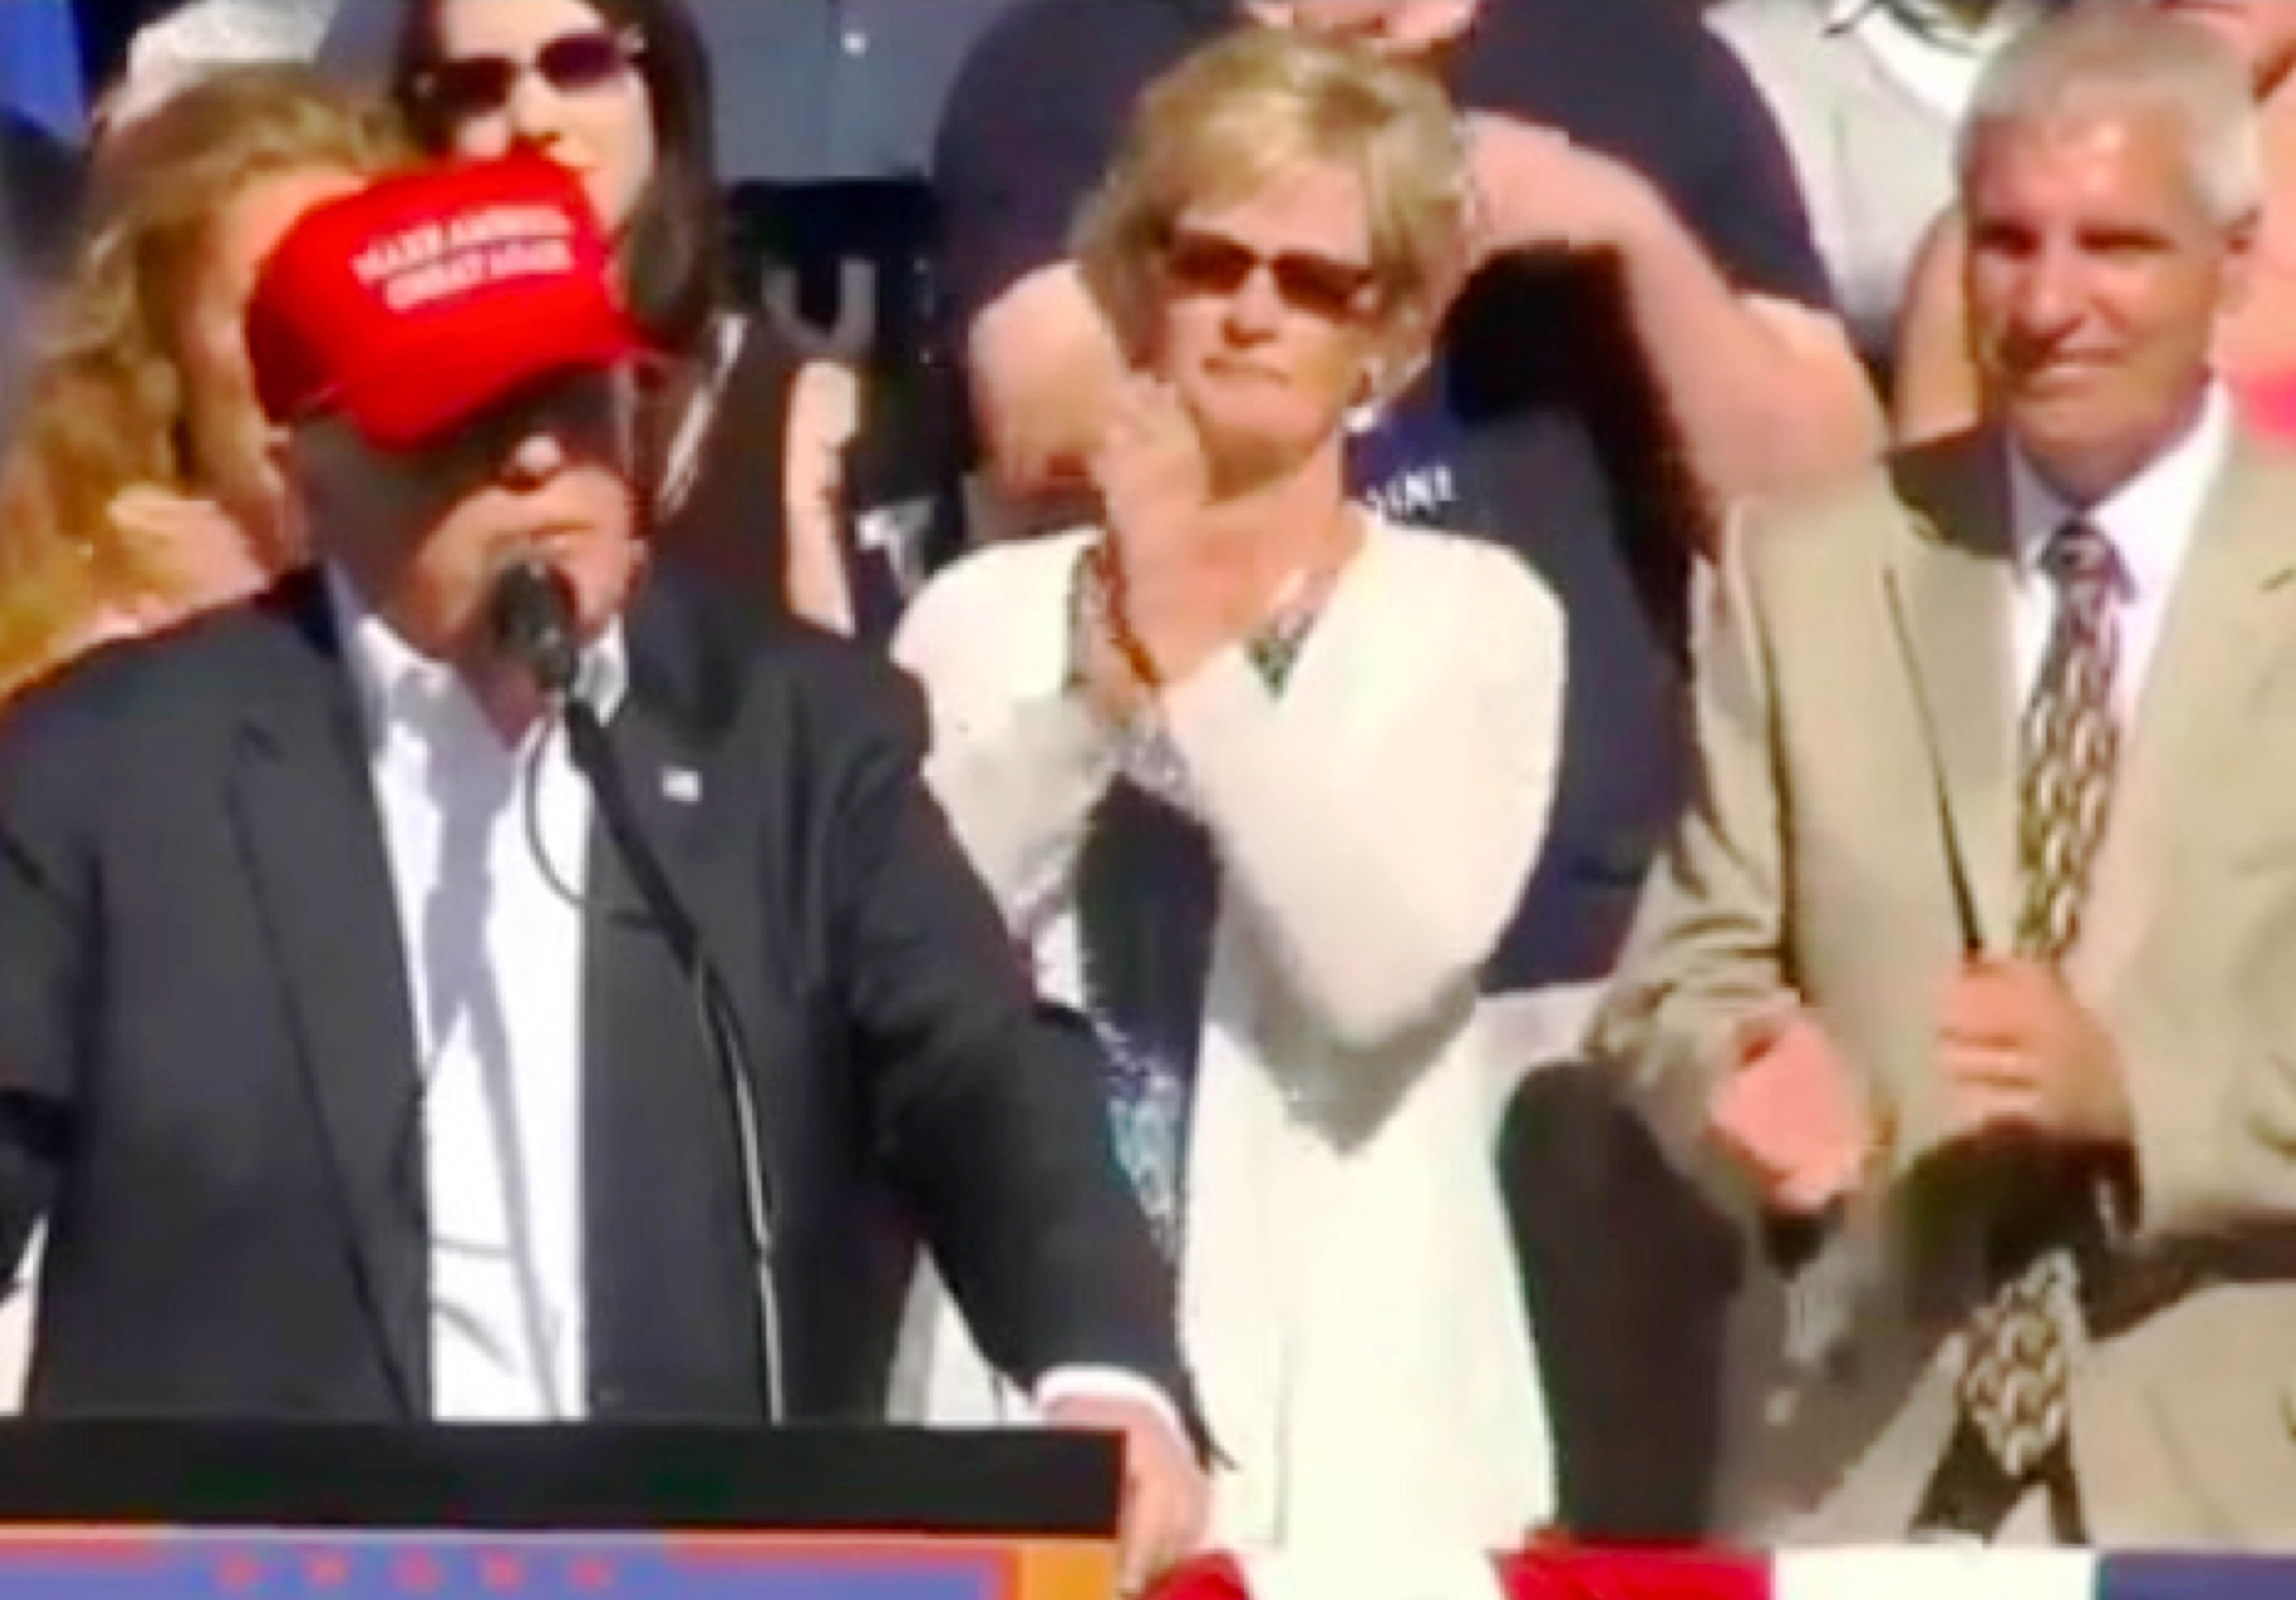 Donald Trump speaking, Lynden Mayor Scott Korthuis on the right and his wife between them. (from YouTube video of rally, ref. 15)